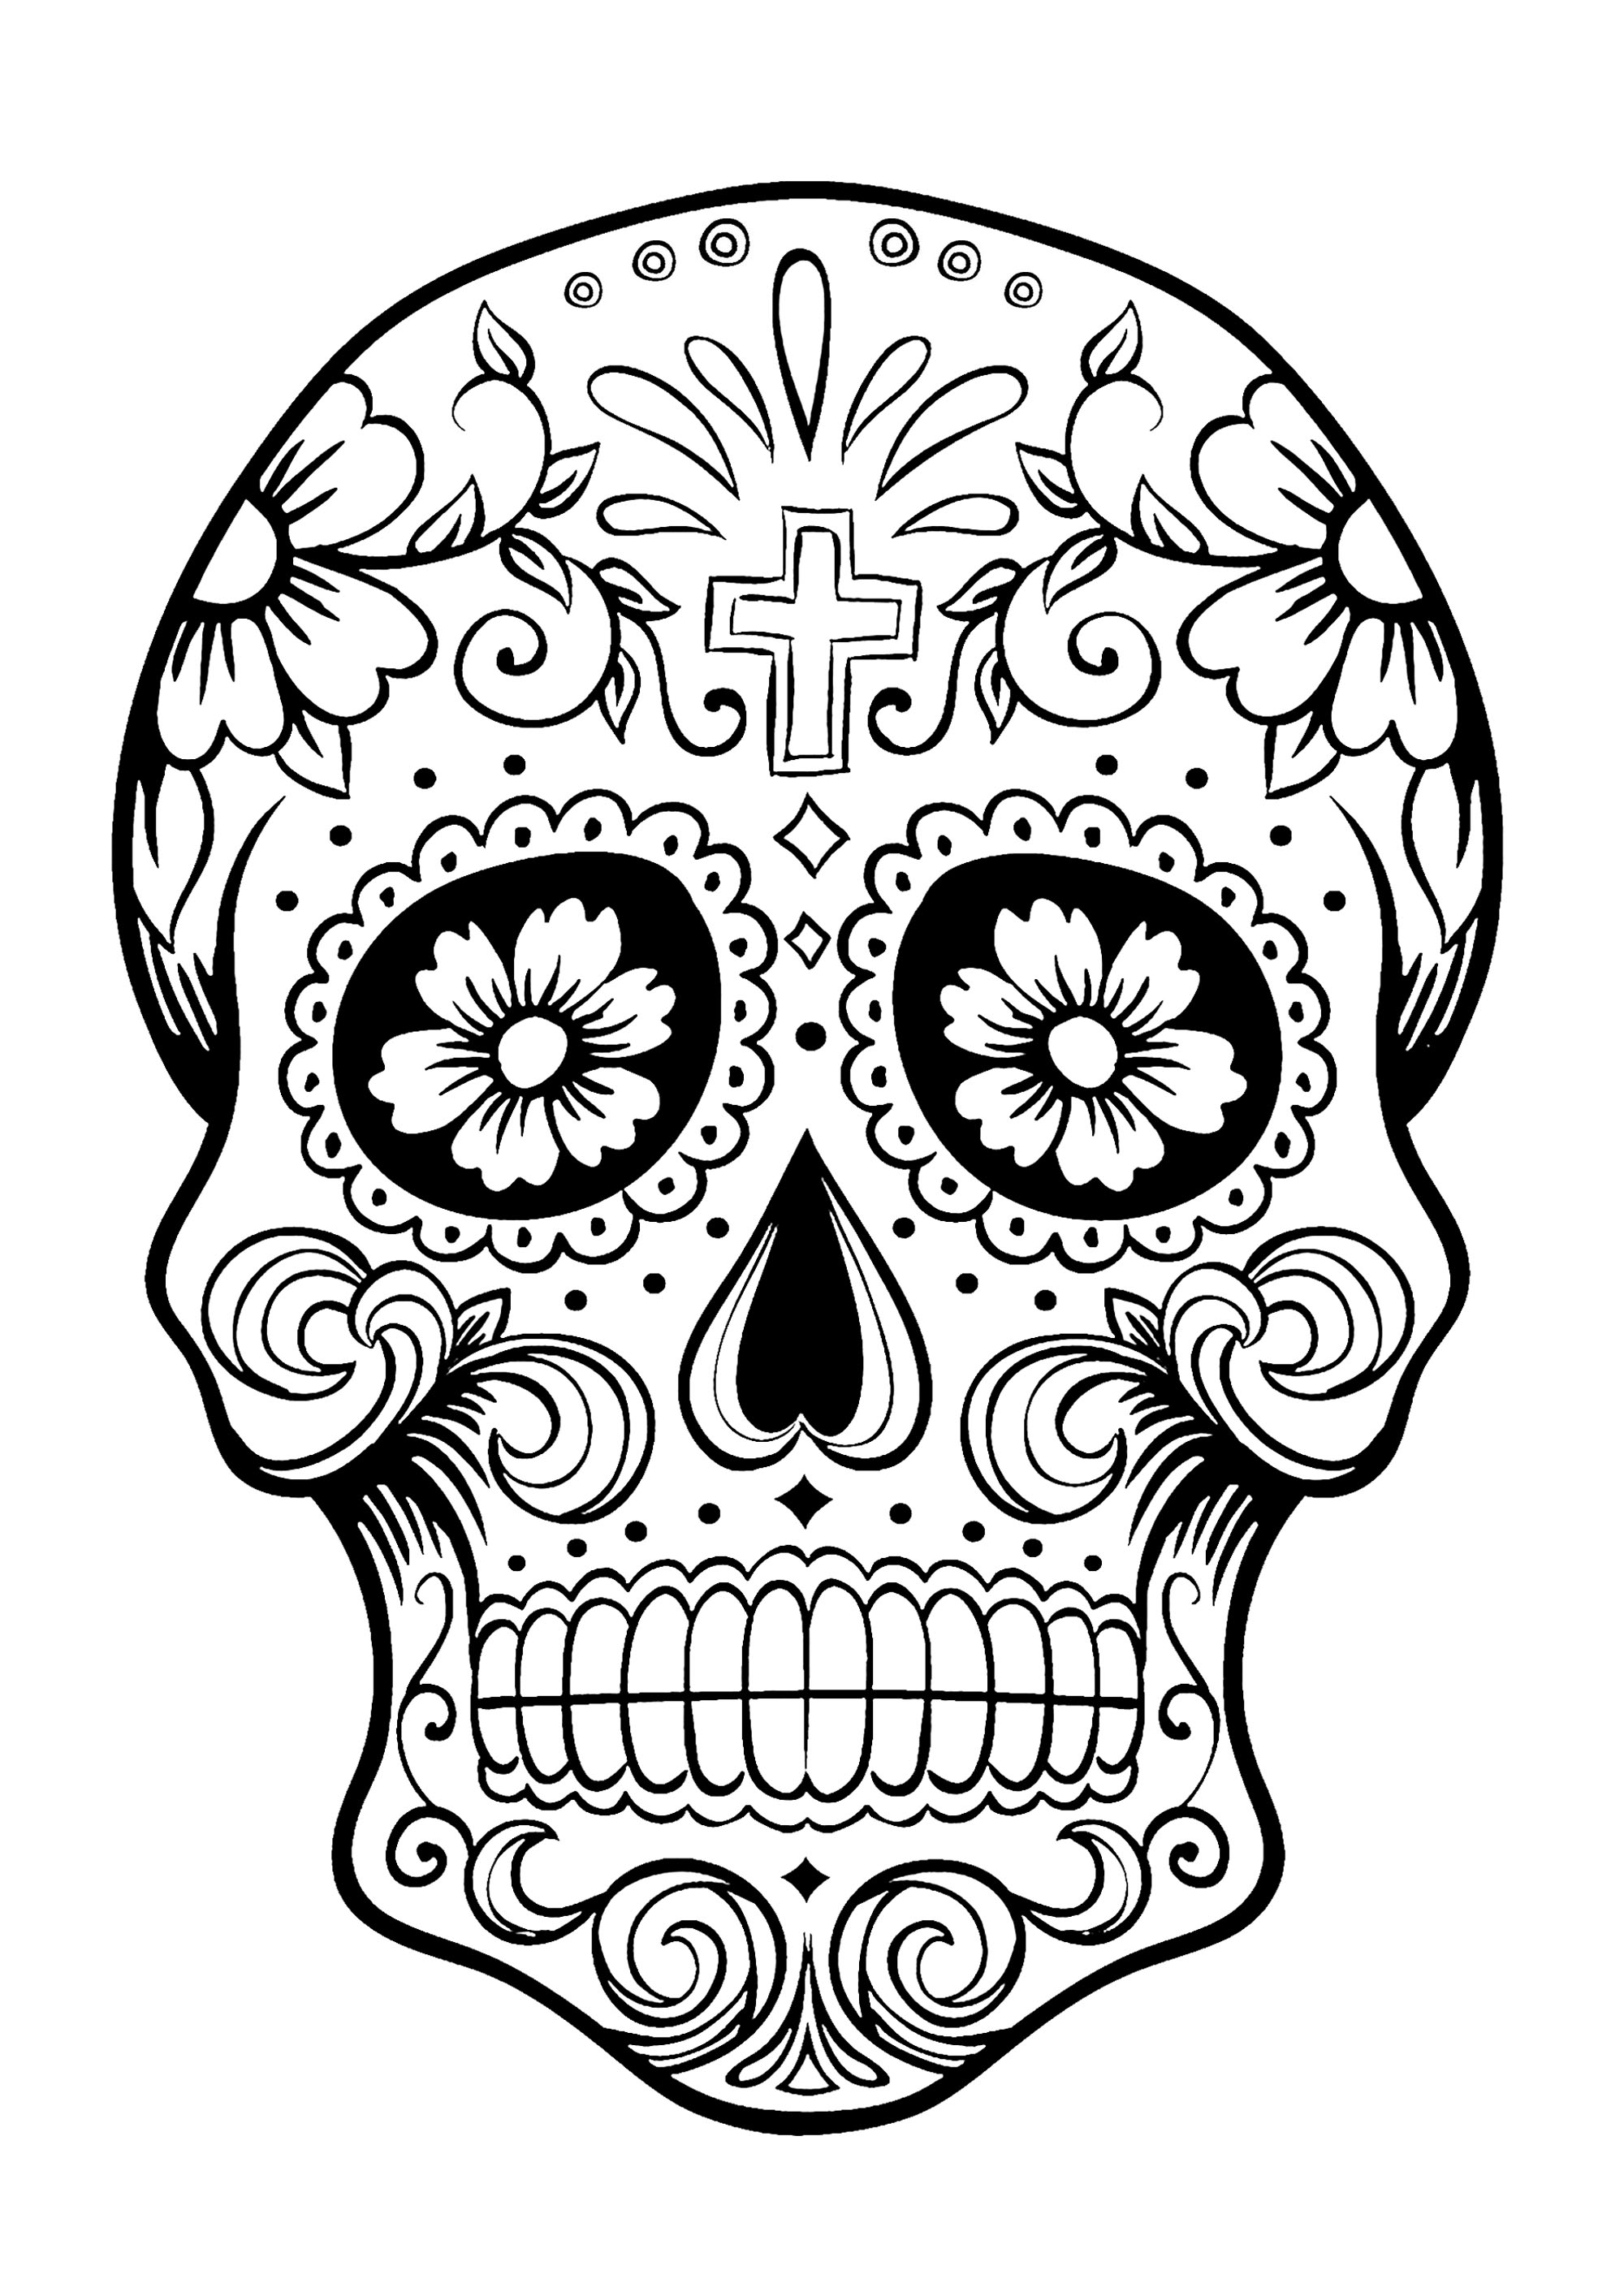 Skull Coloring Pages for Adults. based on Keywords). 